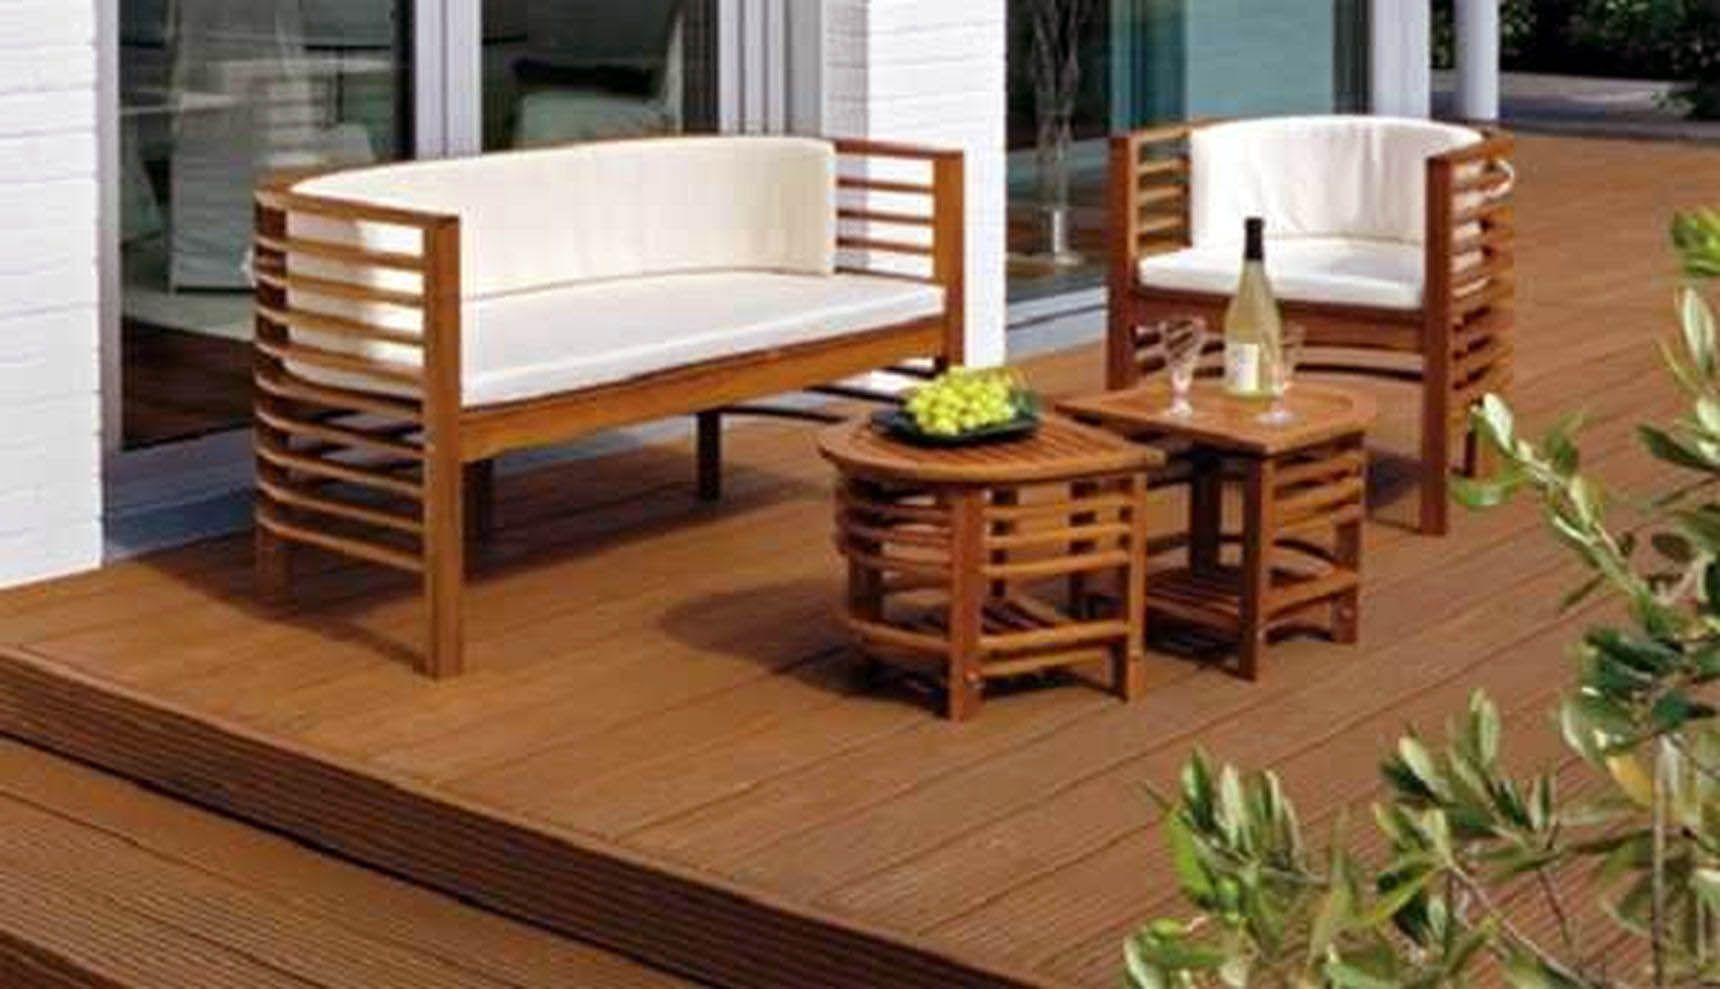 Best outdoor furniture: 18 picks for any budget